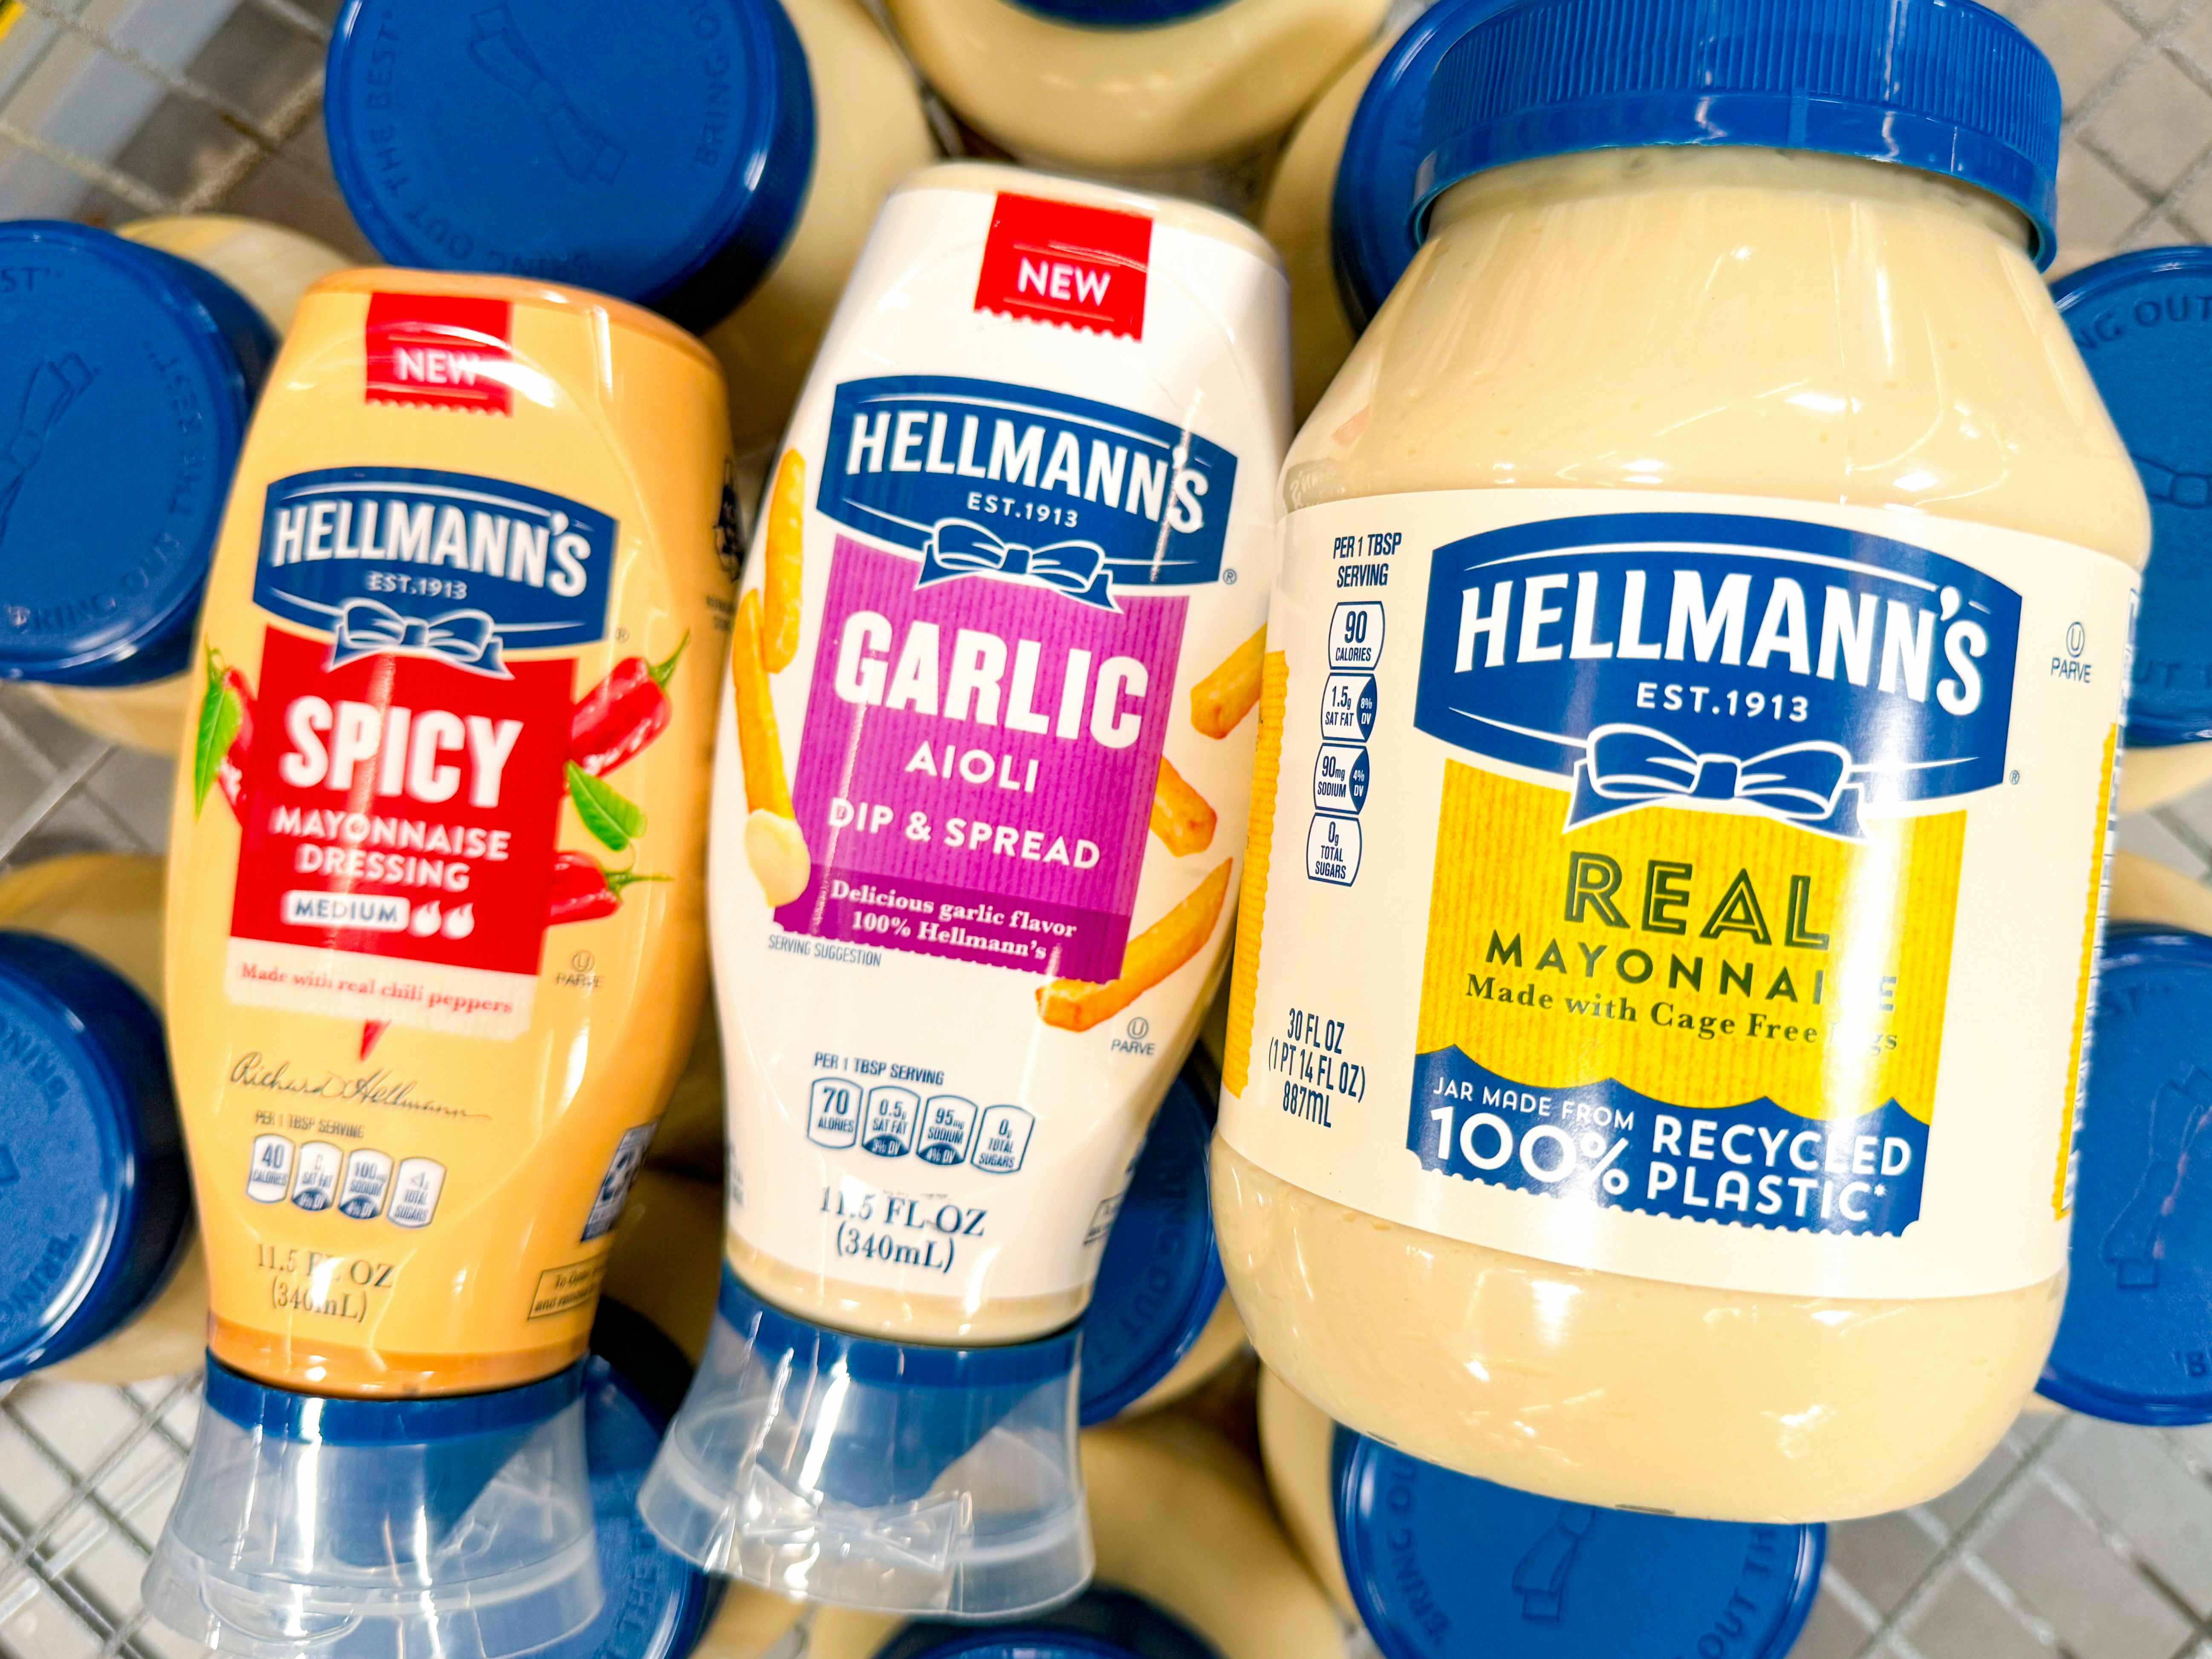 BOGO Offer on Hellmann's Condiments With Save at Walmart and Target